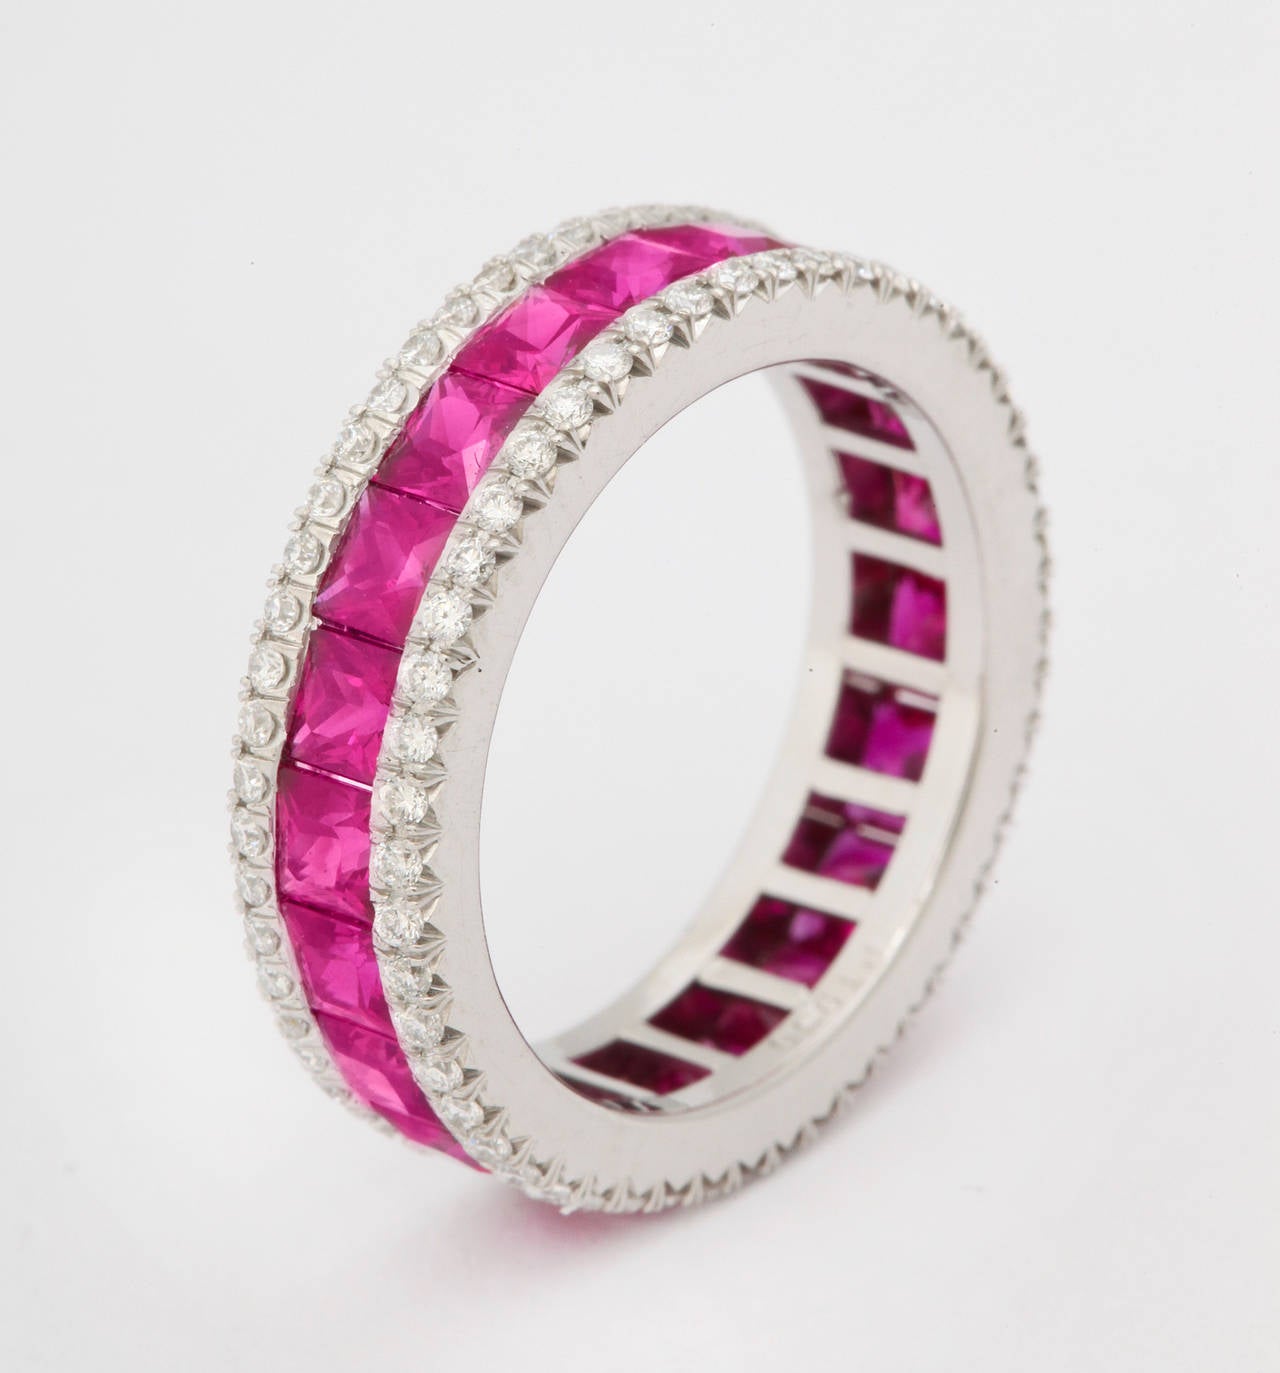 Very finely made platinum, square ruby (app. 3cts) and round diamond (app. 1ct) eternity band ring. The listed price is for a US size 6, but the ring will be custom made to order in your chosen size.  The final price will be dependant upon the size